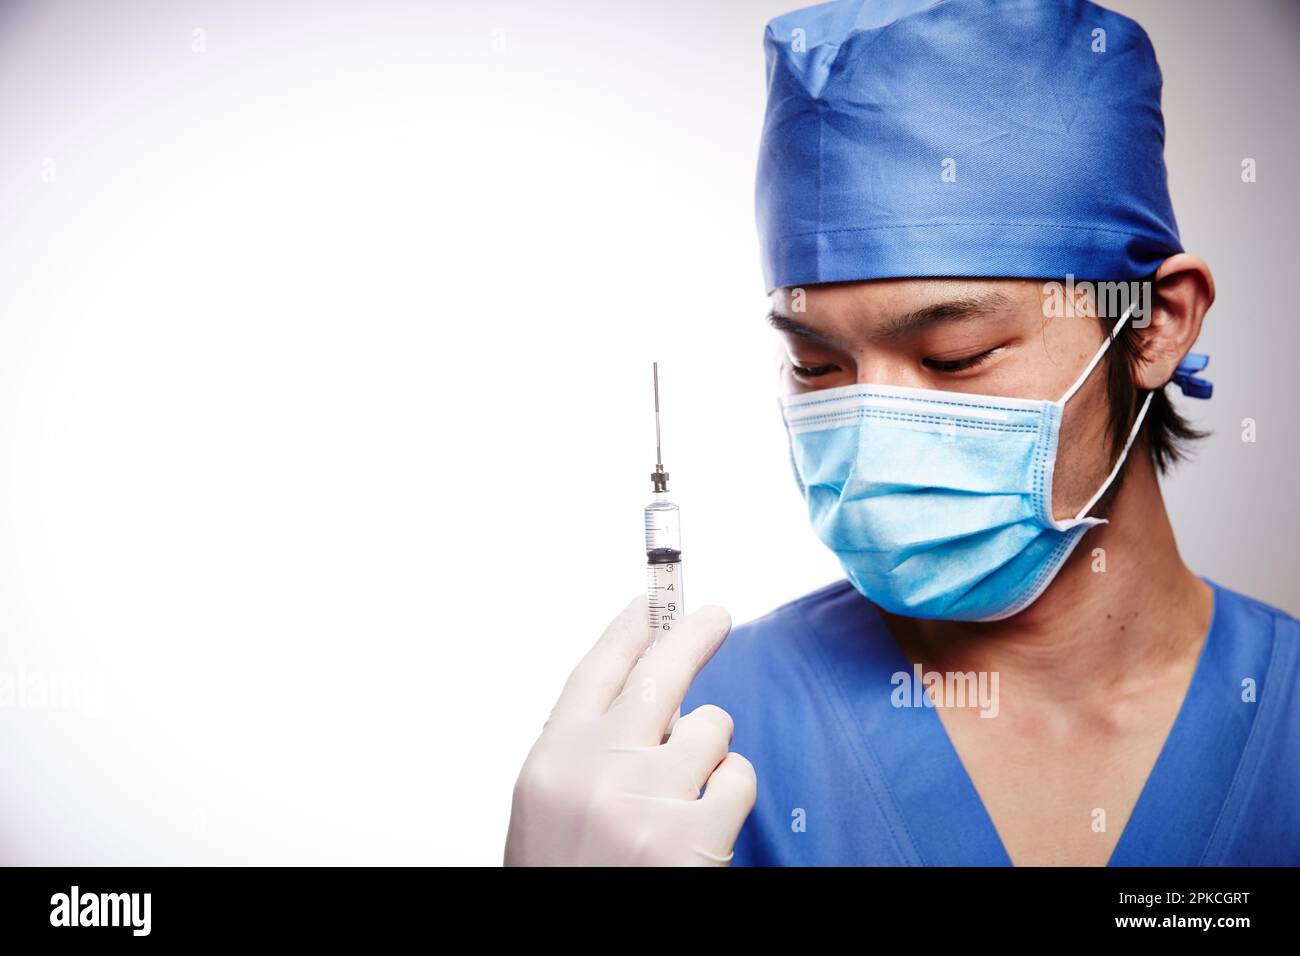 Male doctor in surgical gown holding syringe Stock Photo